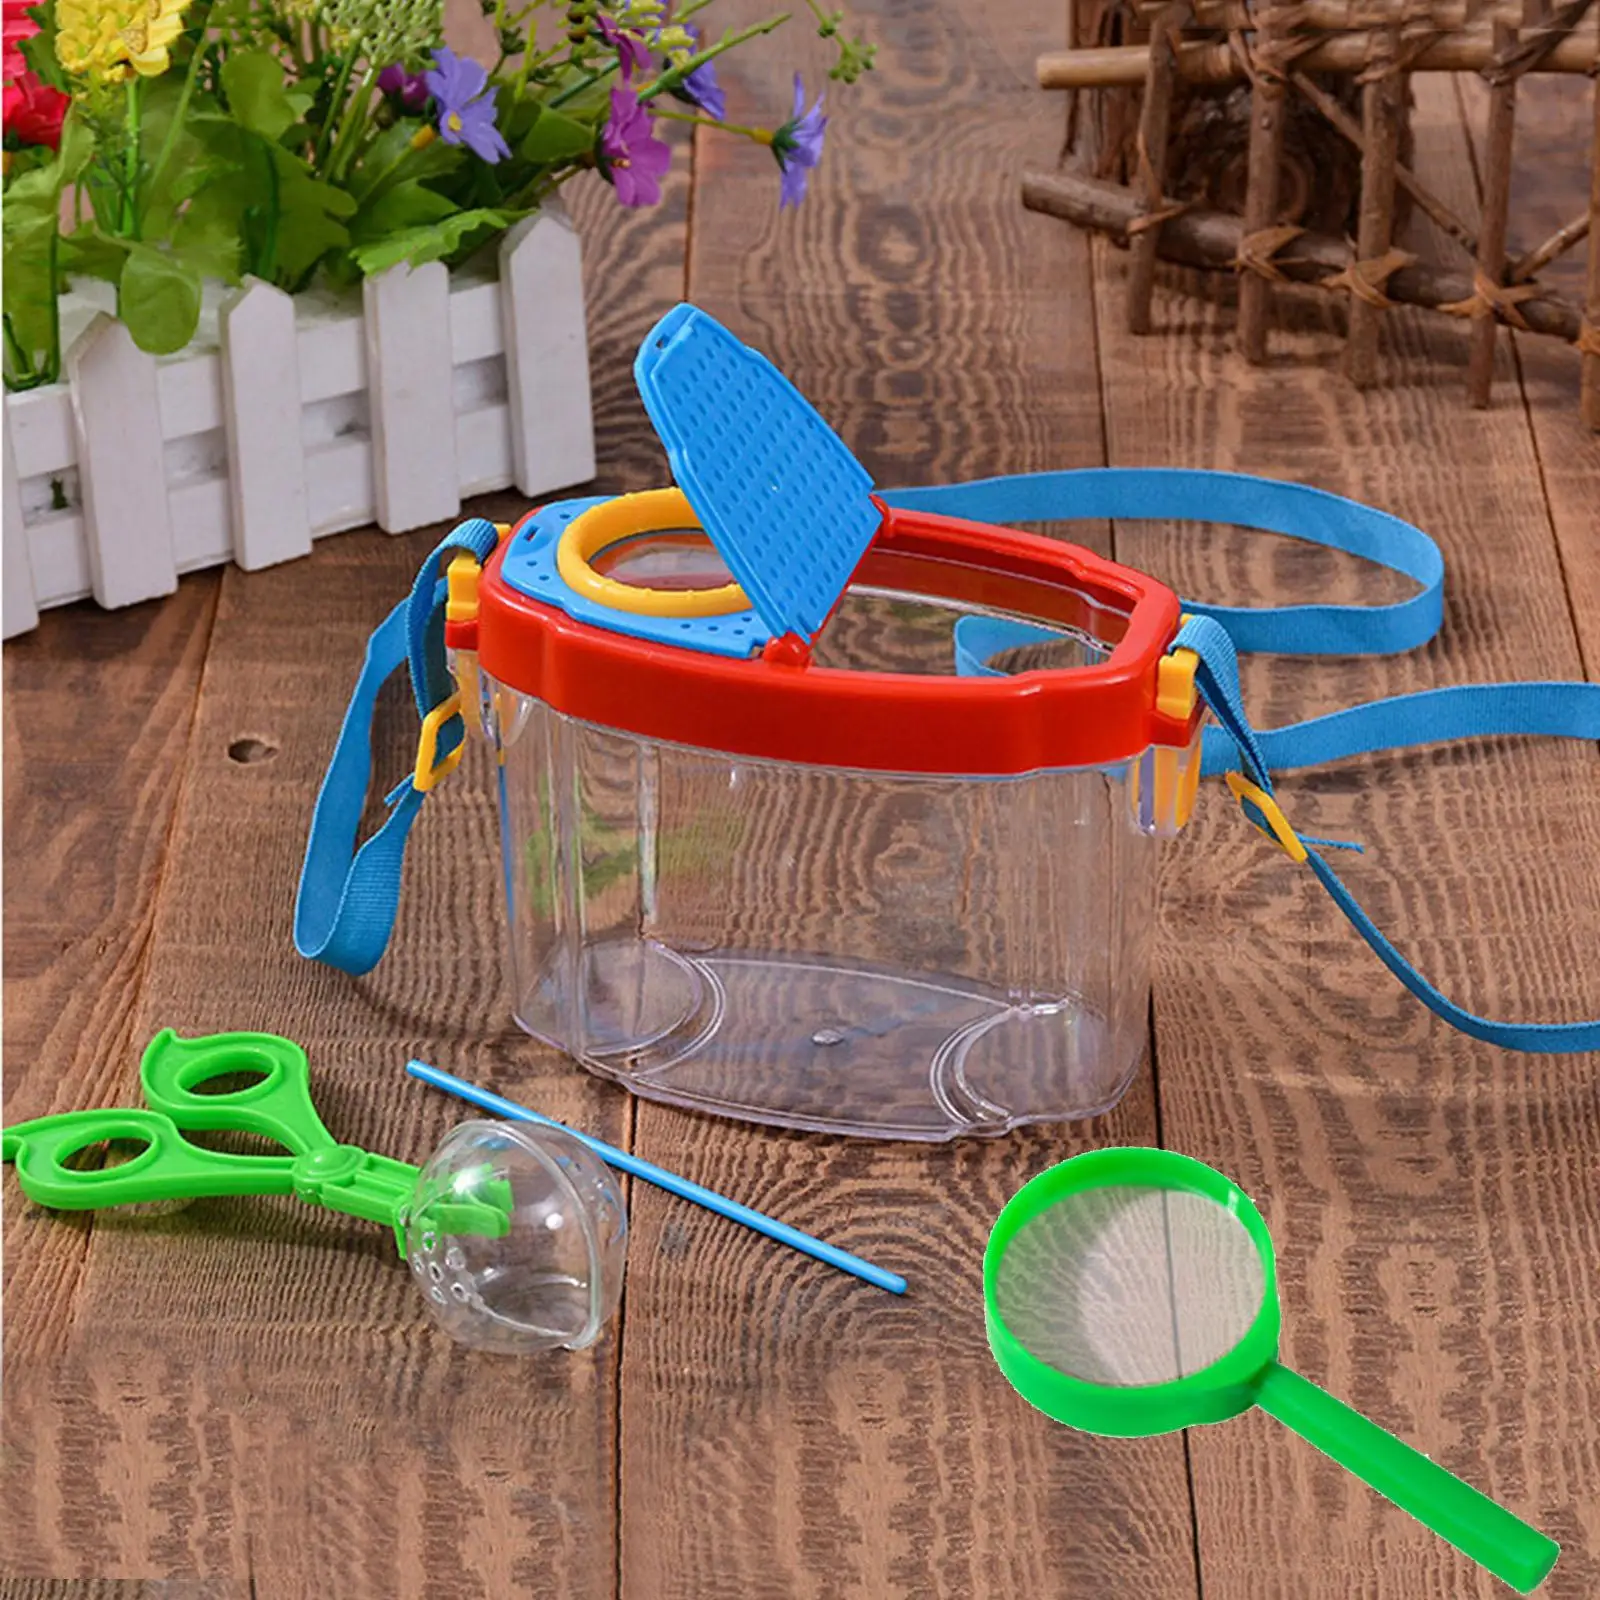 Bug Insect Magnifier Observer Kit Insect Viewer Magnifier Box Exploration Toy Kid Learning Development Toy